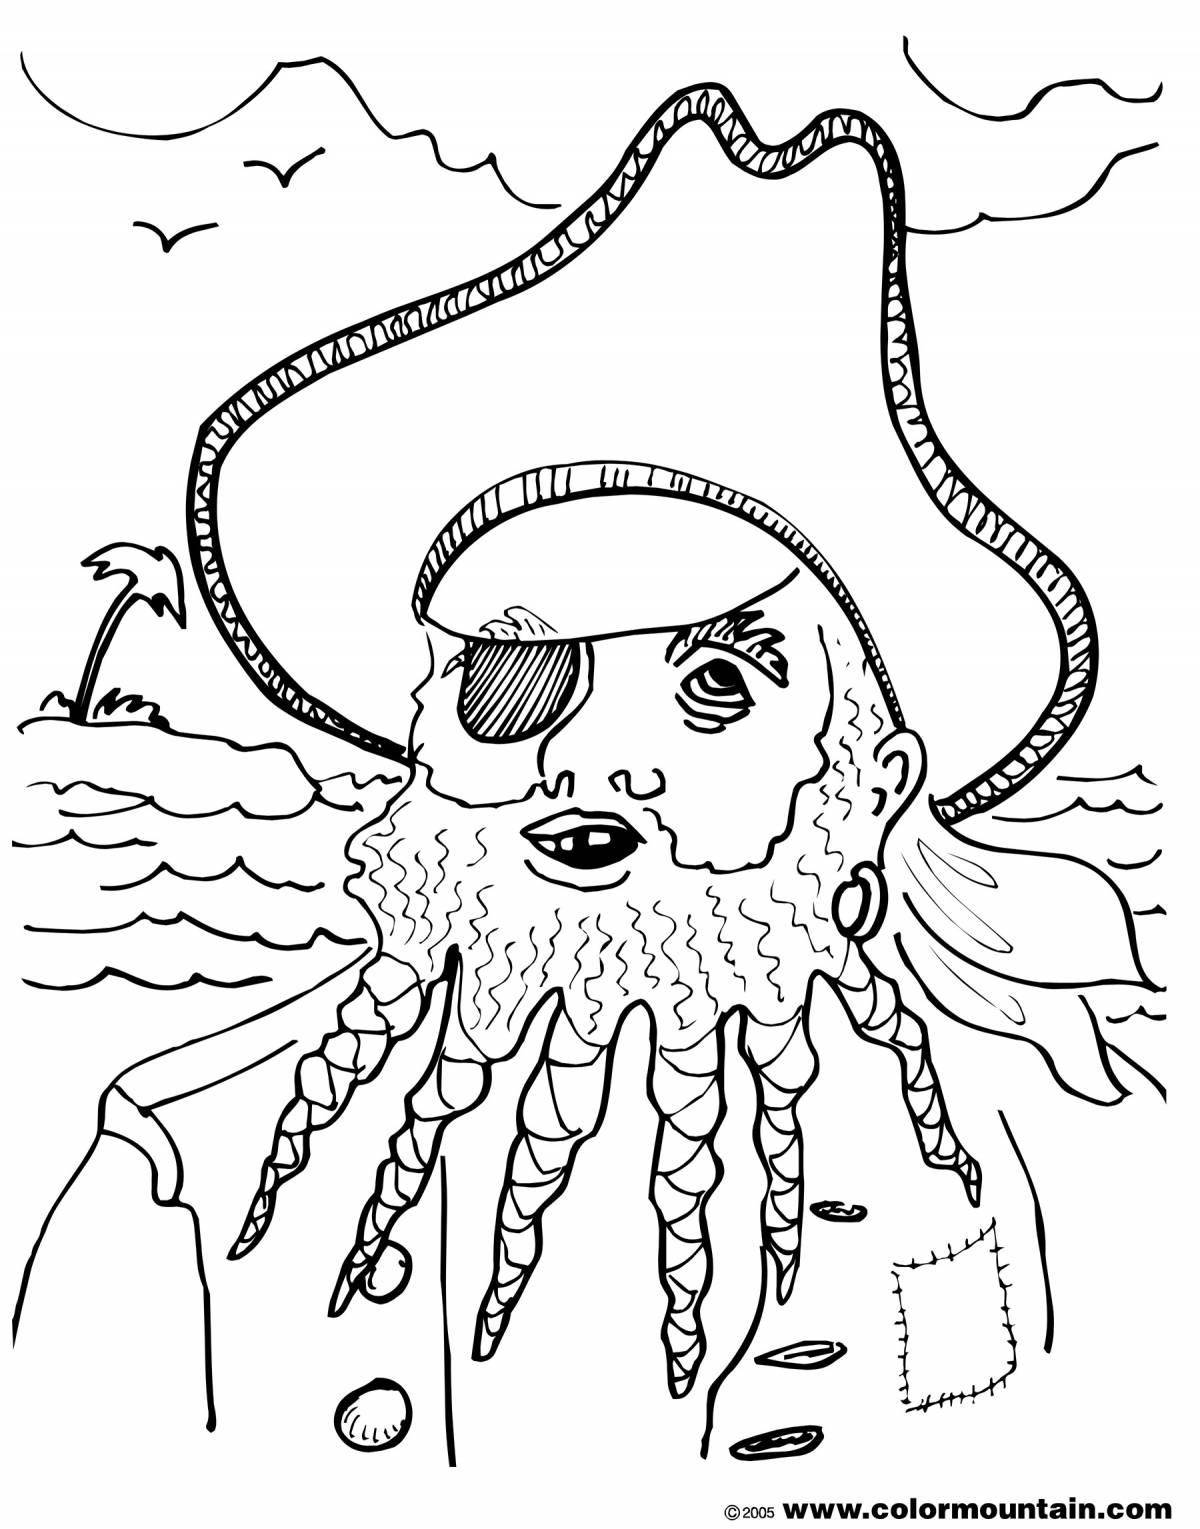 Dazzling blue beard coloring page